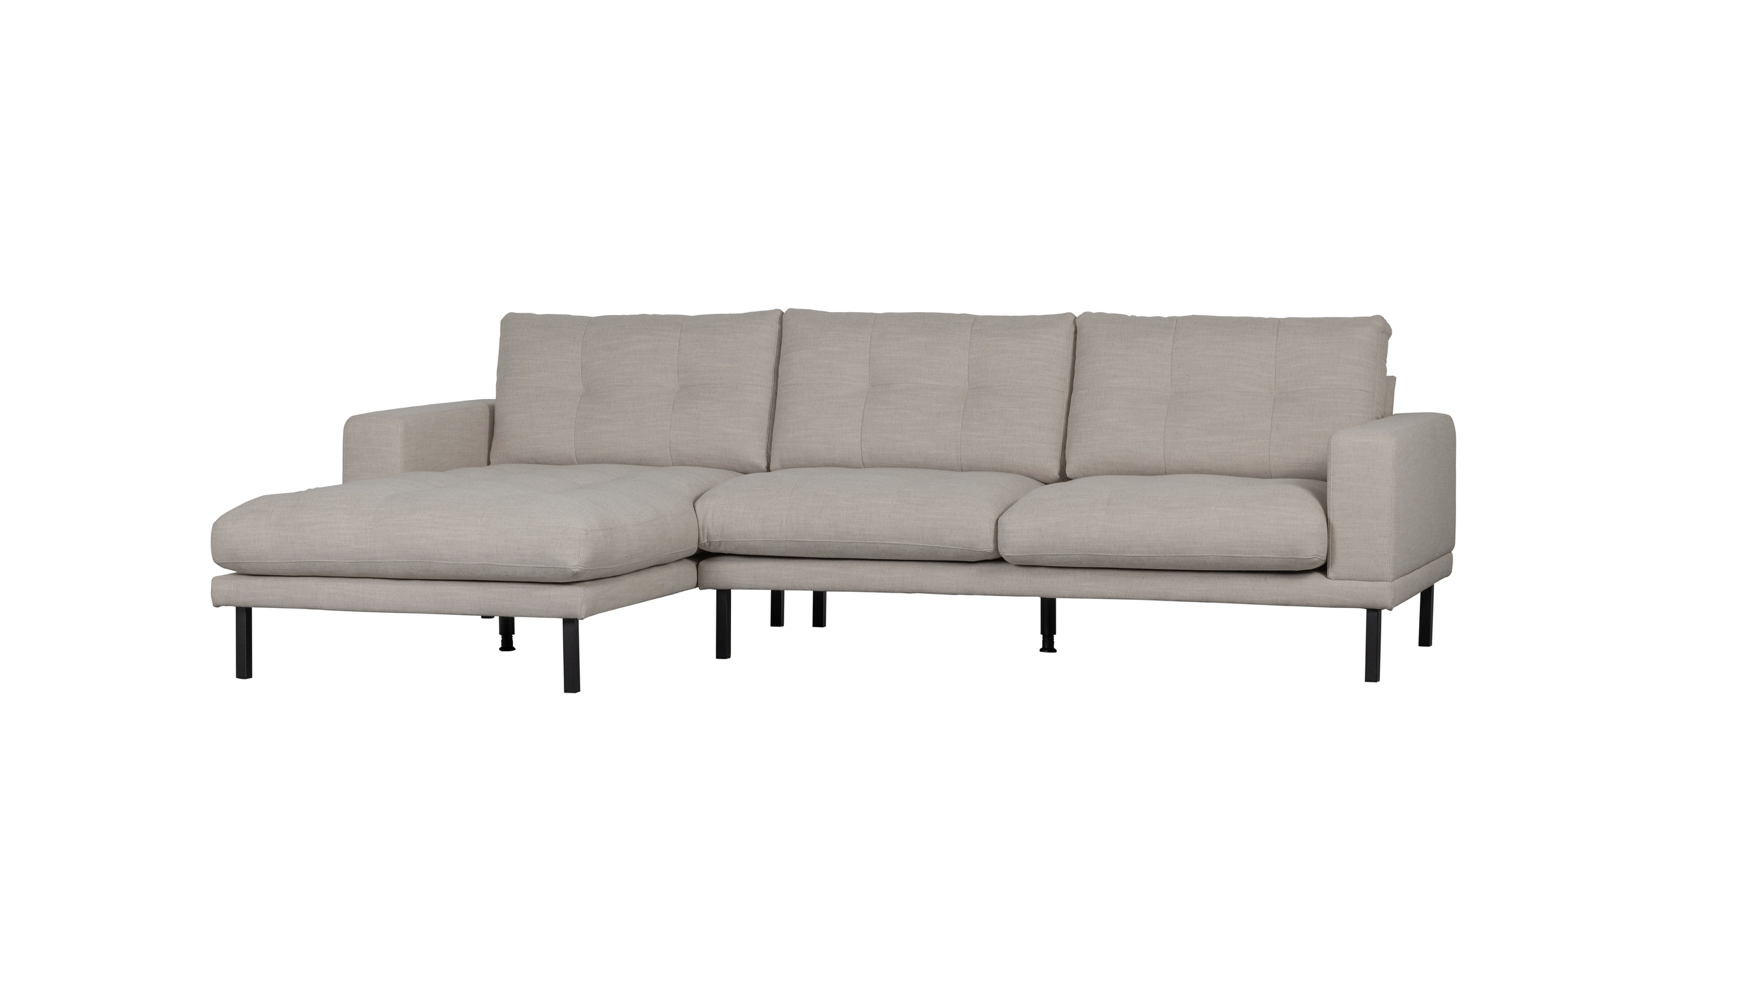 WOOOD EXCLUSIVE RIVER WOOOD - Chaise longue padded naturel